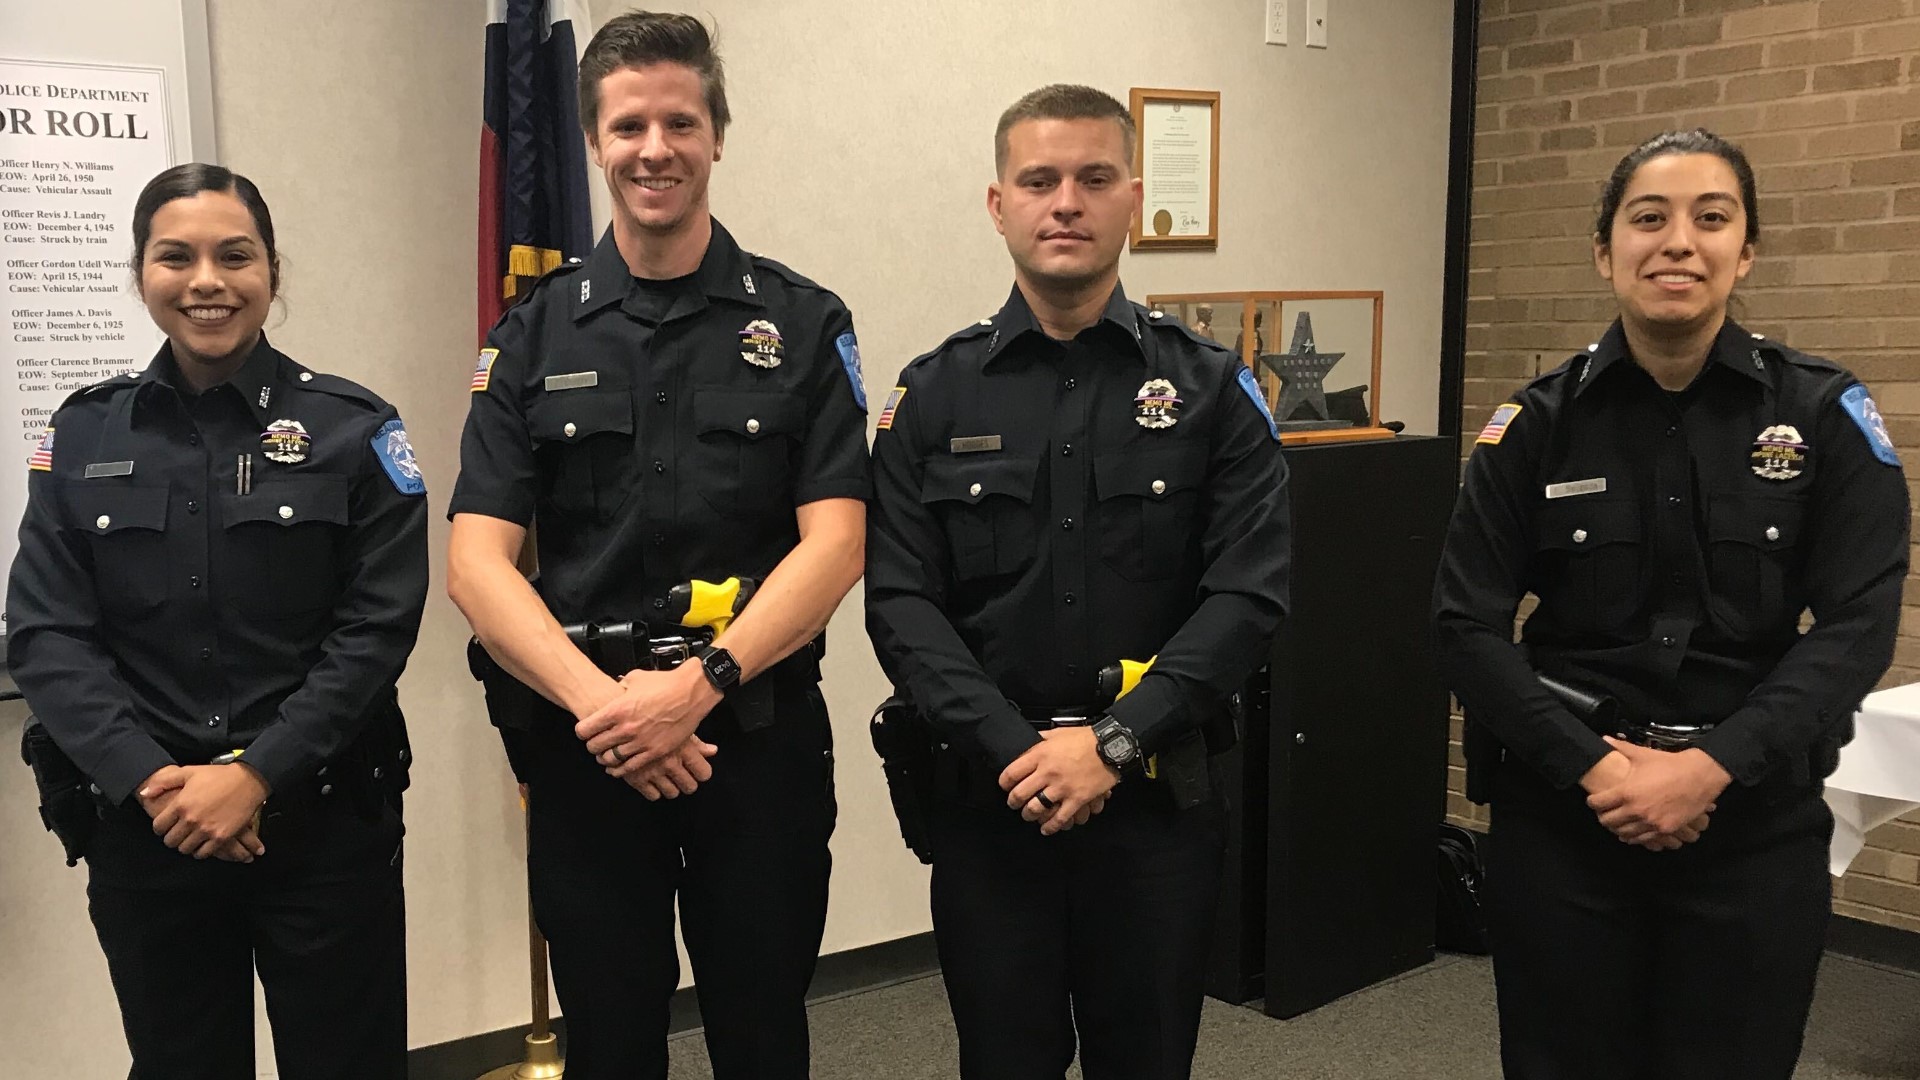 Beaumont Police Swears In Four New Officers In Aug 2020